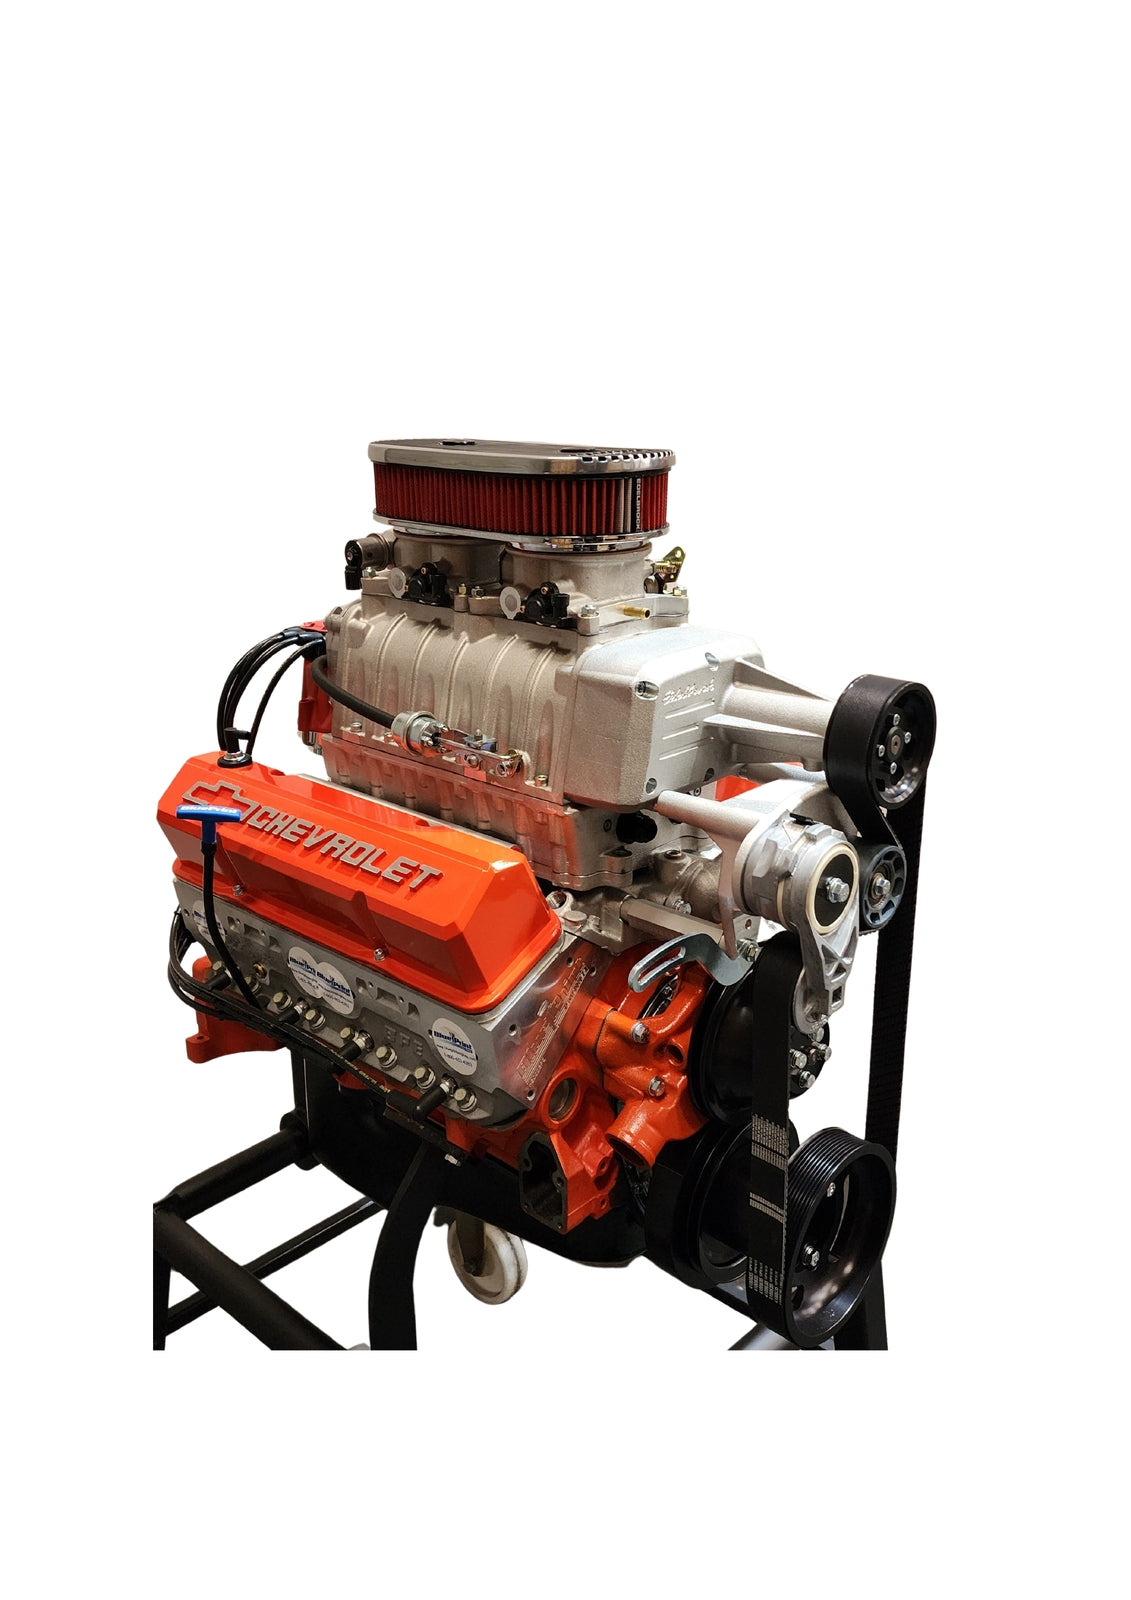 AA1 Chev 383 Supercharged Engine Package # 383-EDEL-SUPER